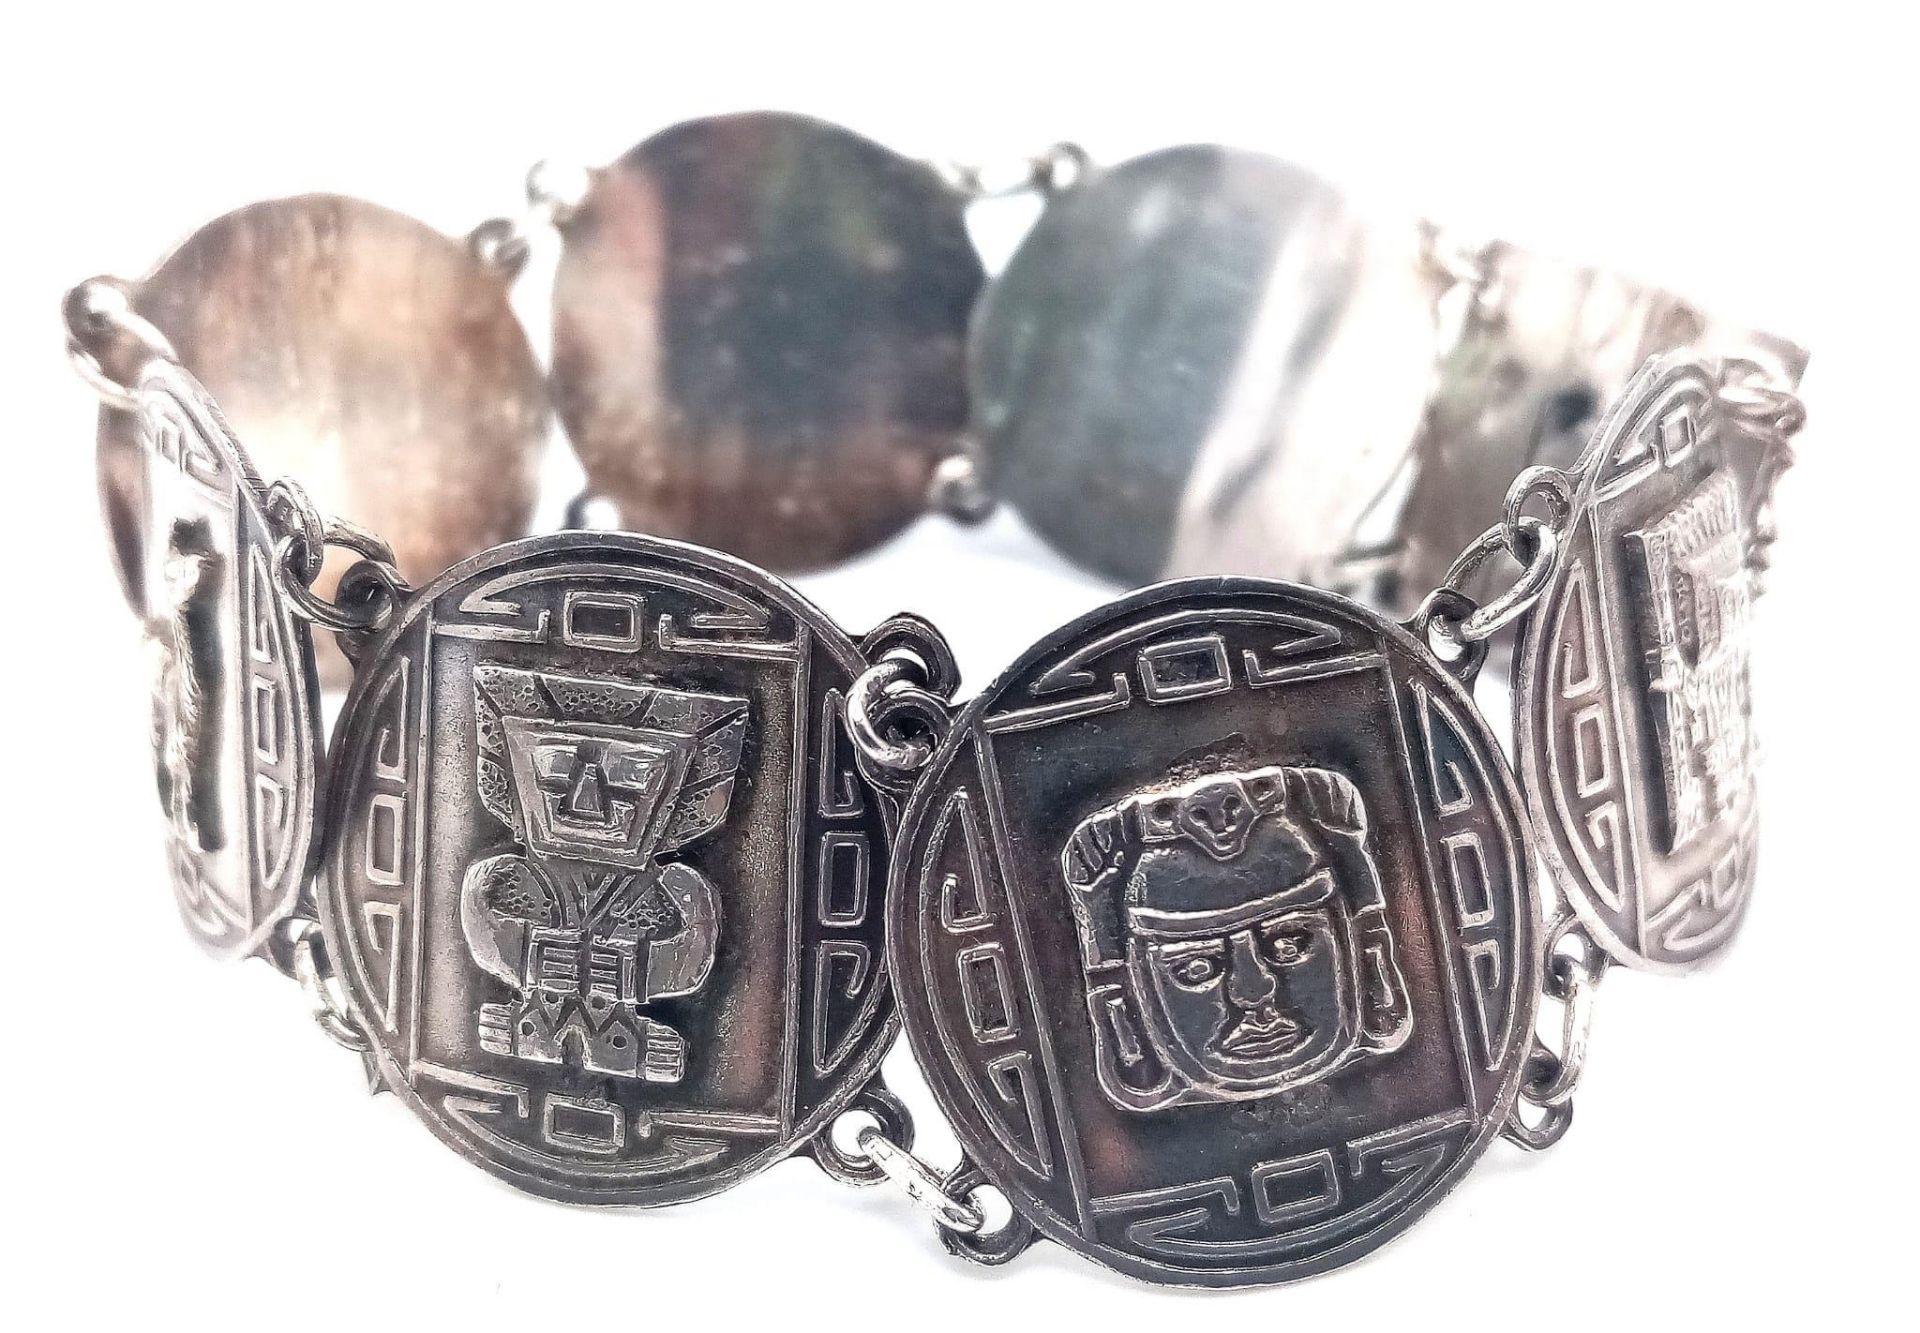 A Silver Fancy Aztec Bracelet with Safety Chain. 19cm length, 26.2g total weight. Ref: 8065 - Image 2 of 4